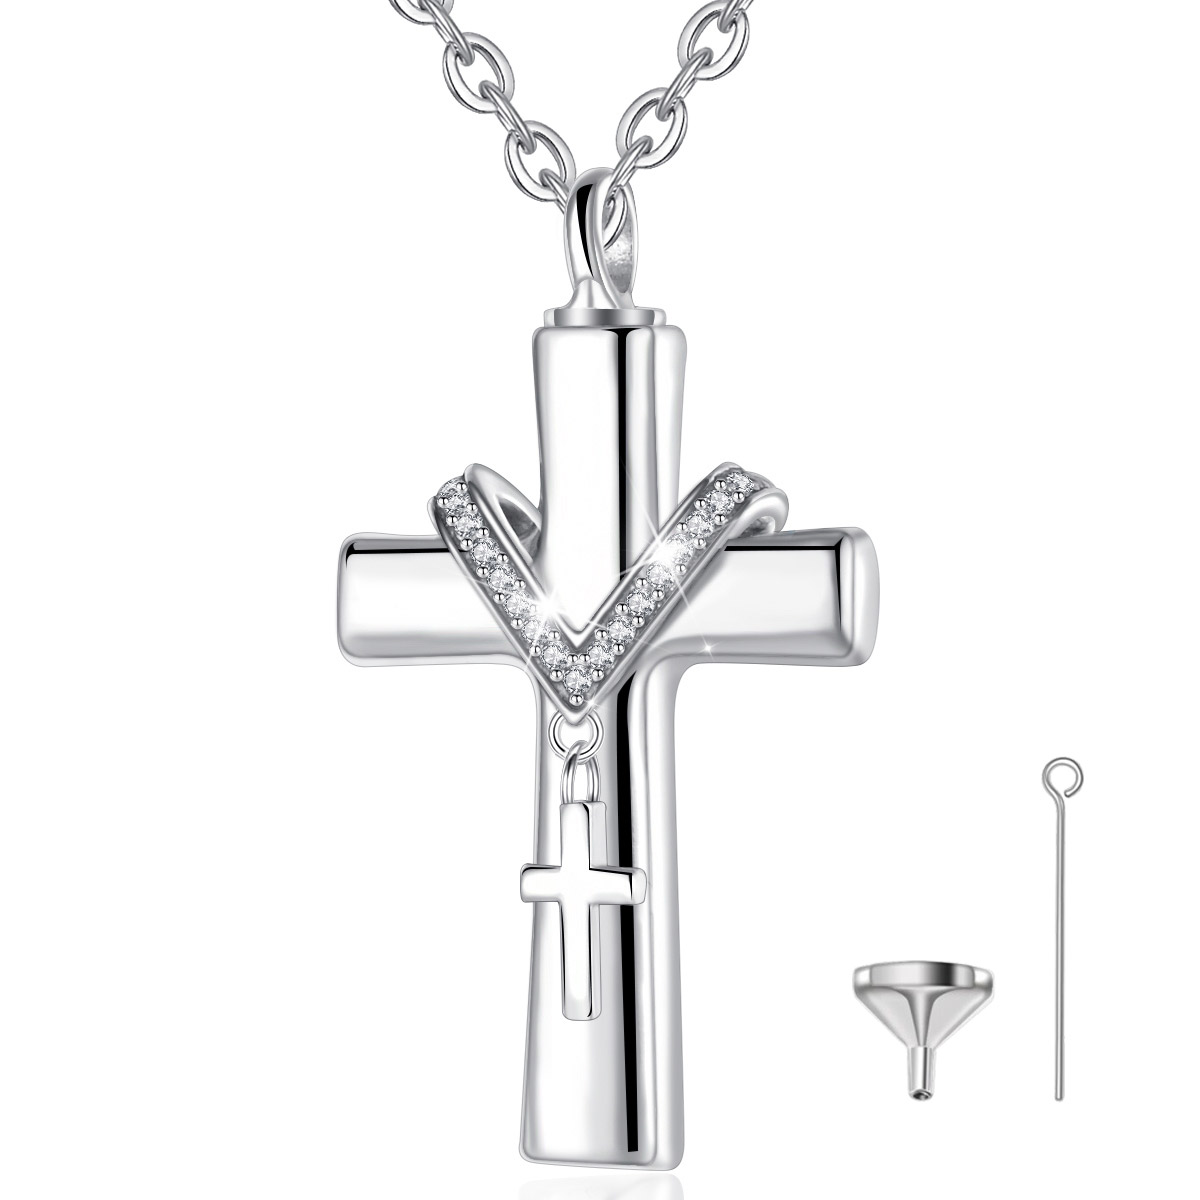 Merryshine Jewelry Cross cremation ashes urn memorial locket jewelry pendant necklace